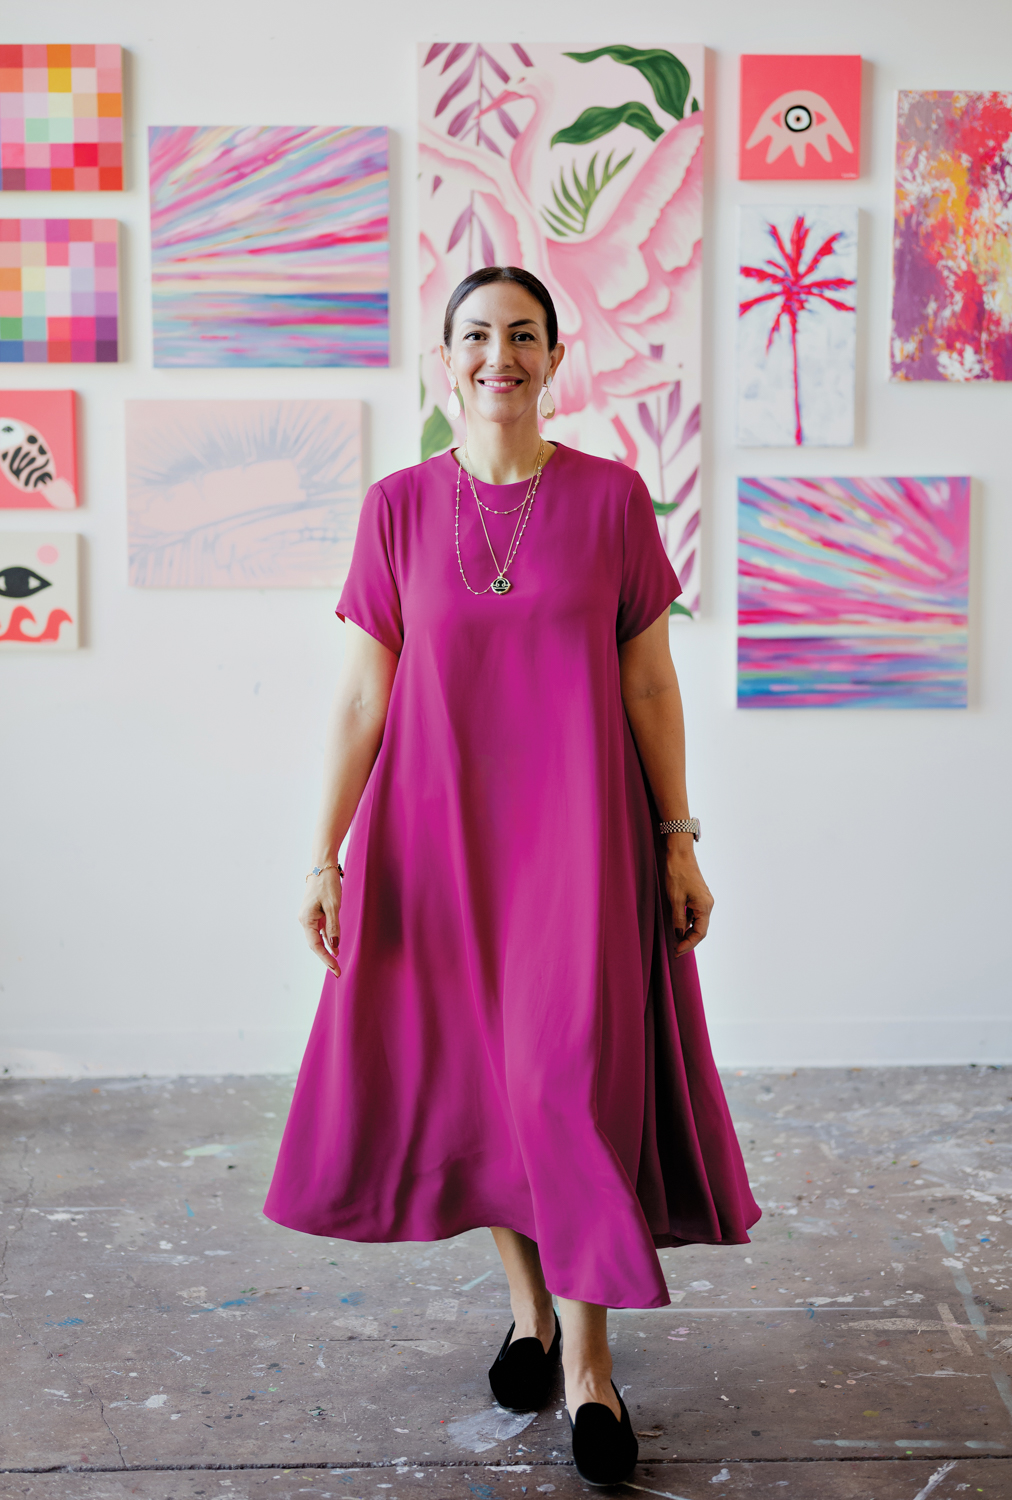 Gaby Viteri stands in a pink dress with a gallery wall of pink paintings behind her.